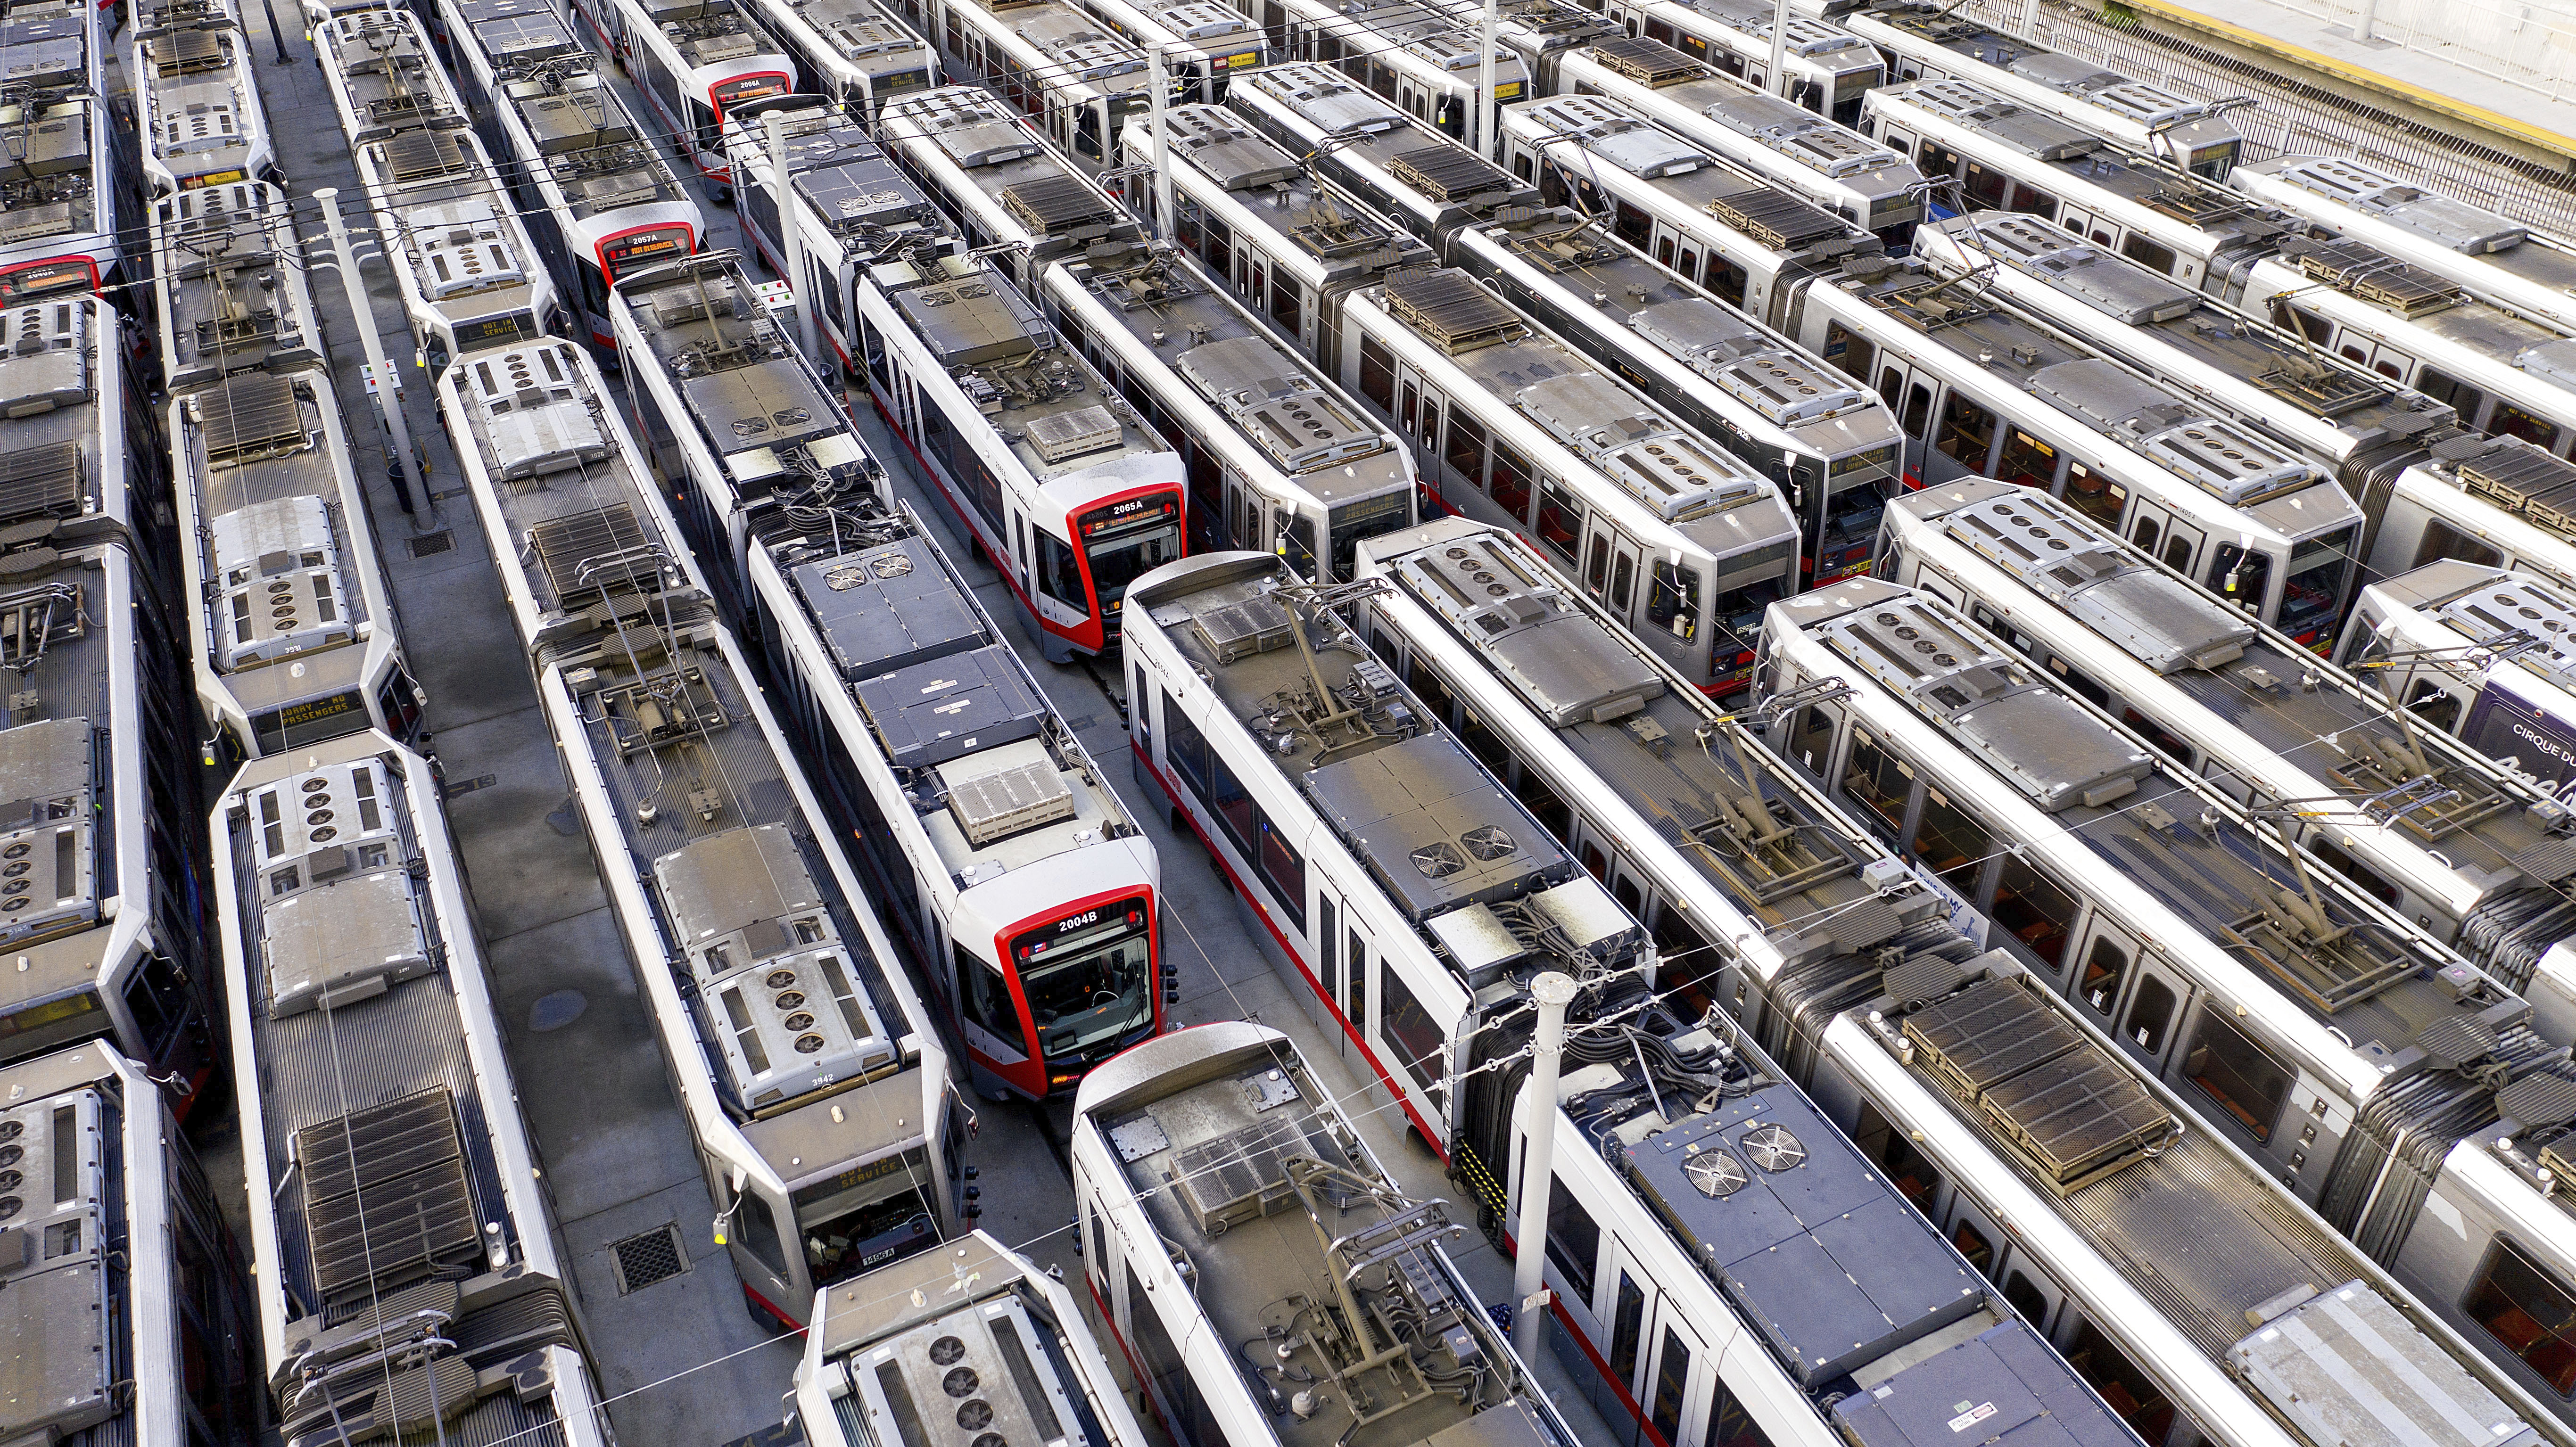 Muni light rail cars rest dormant at a Geneva Ave. storage and maintenance facility on Monday, March 30, 2020, in San Francisco. On Monday, San Francisco Municipal Transportation Agency (SFMTA) indefinitely suspended all light rail service due to plummeting readership caused by coronavirus shelter-in-place orders. (AP Photo/Noah Berger)